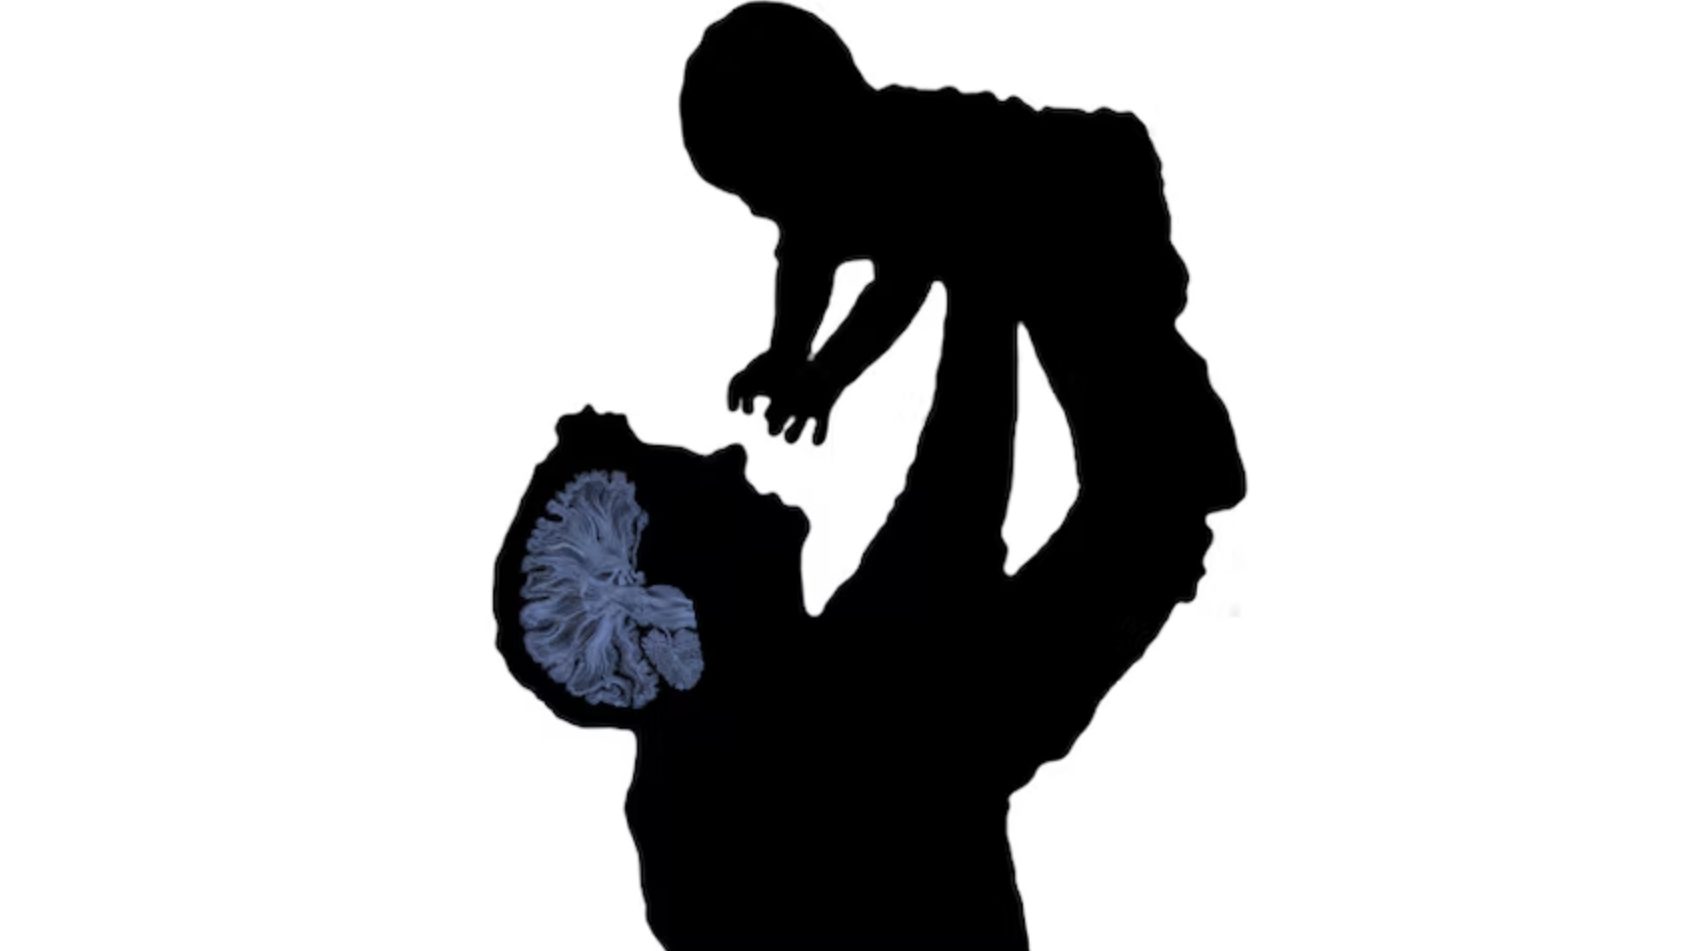 Fatherhood Changes Men’s Brains, According to Before-&-After MRI
Scans